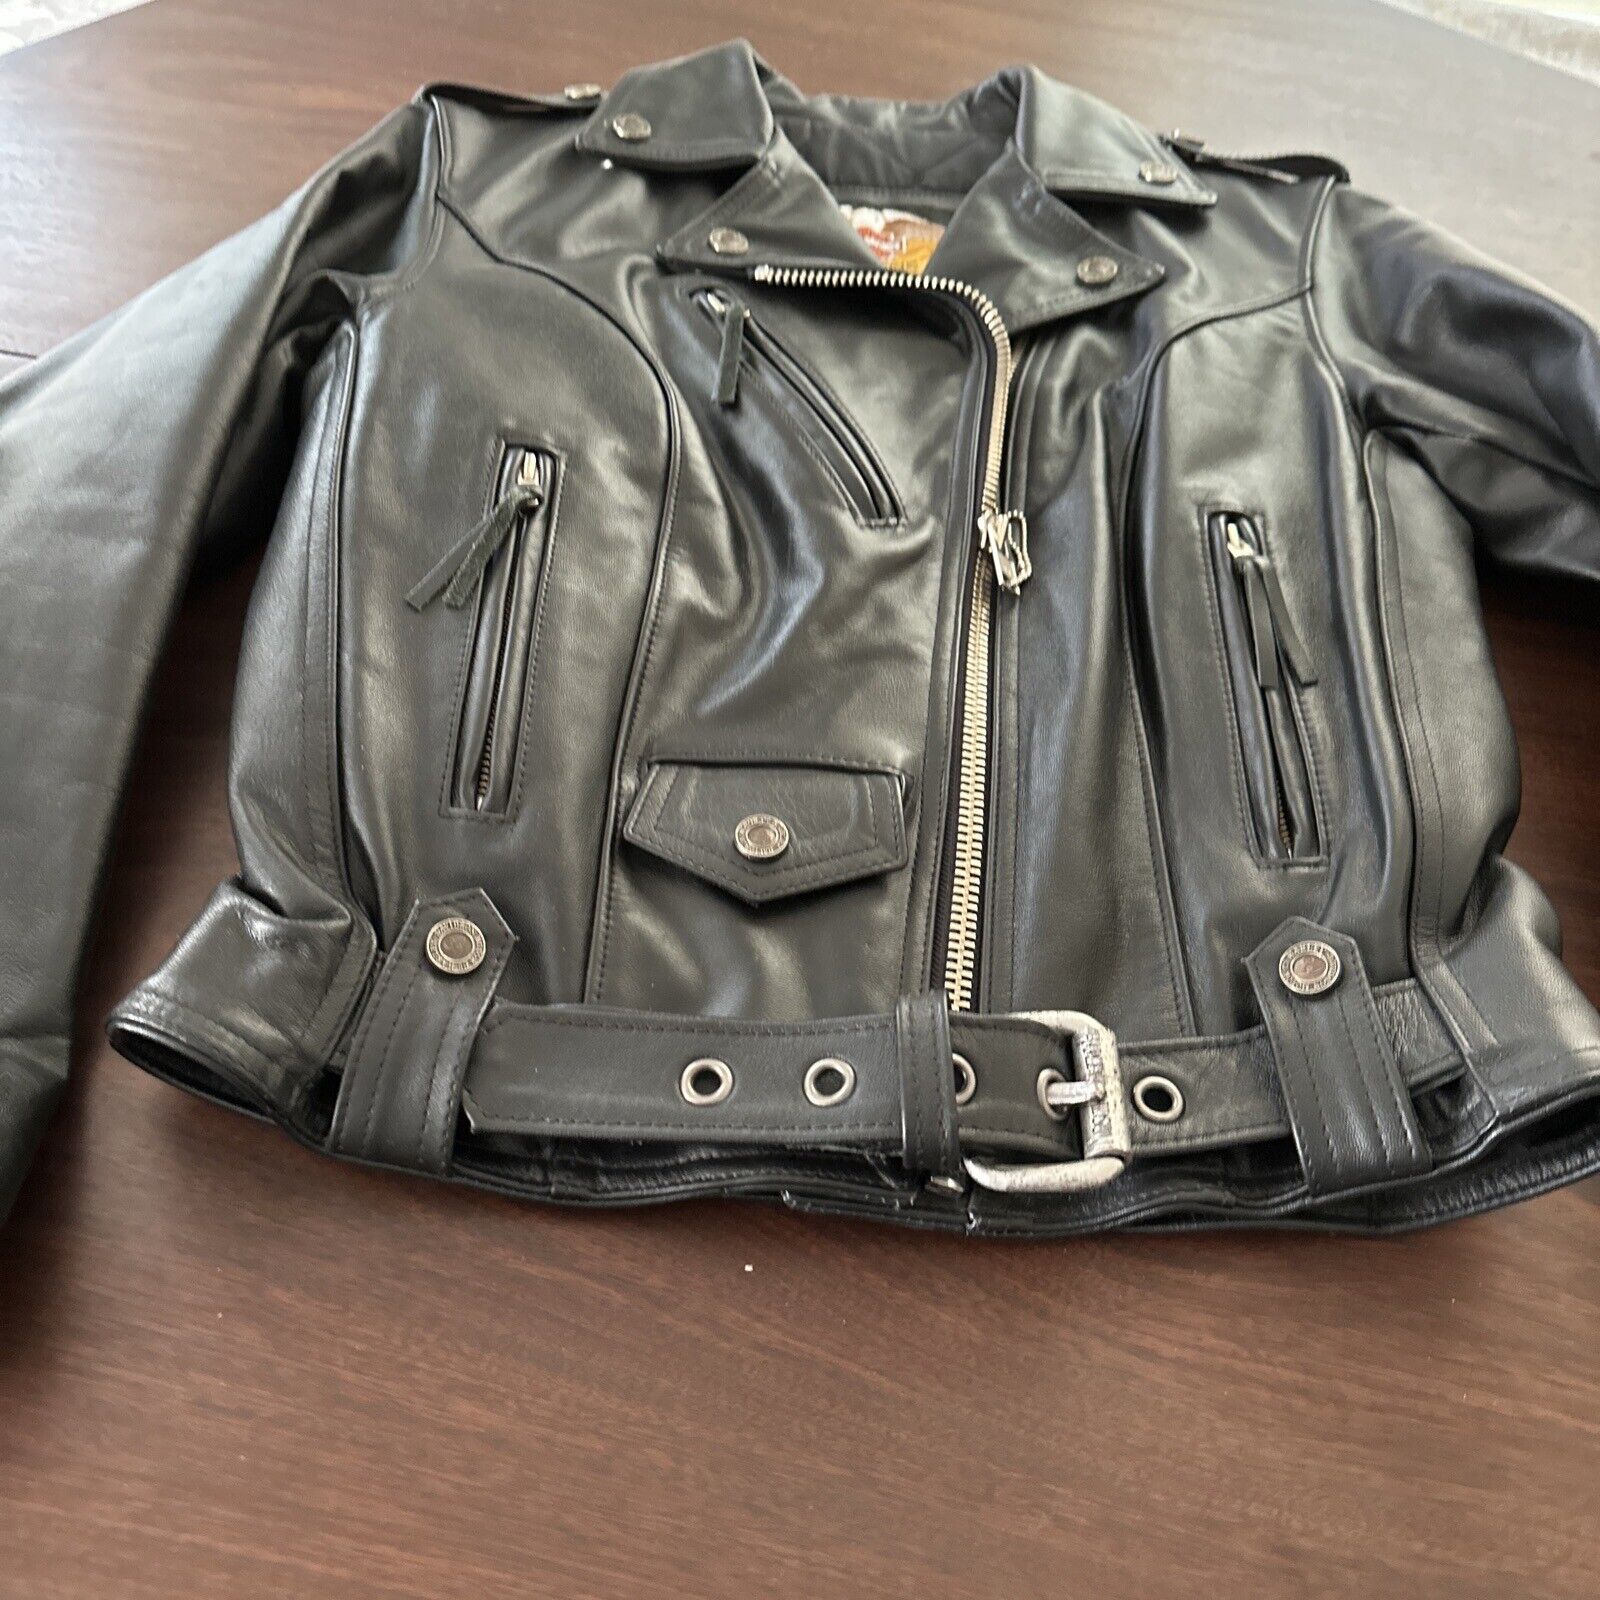 VTG Harley Davidson Women\'s Black Leather Riding Jacket Made In USA Size Small